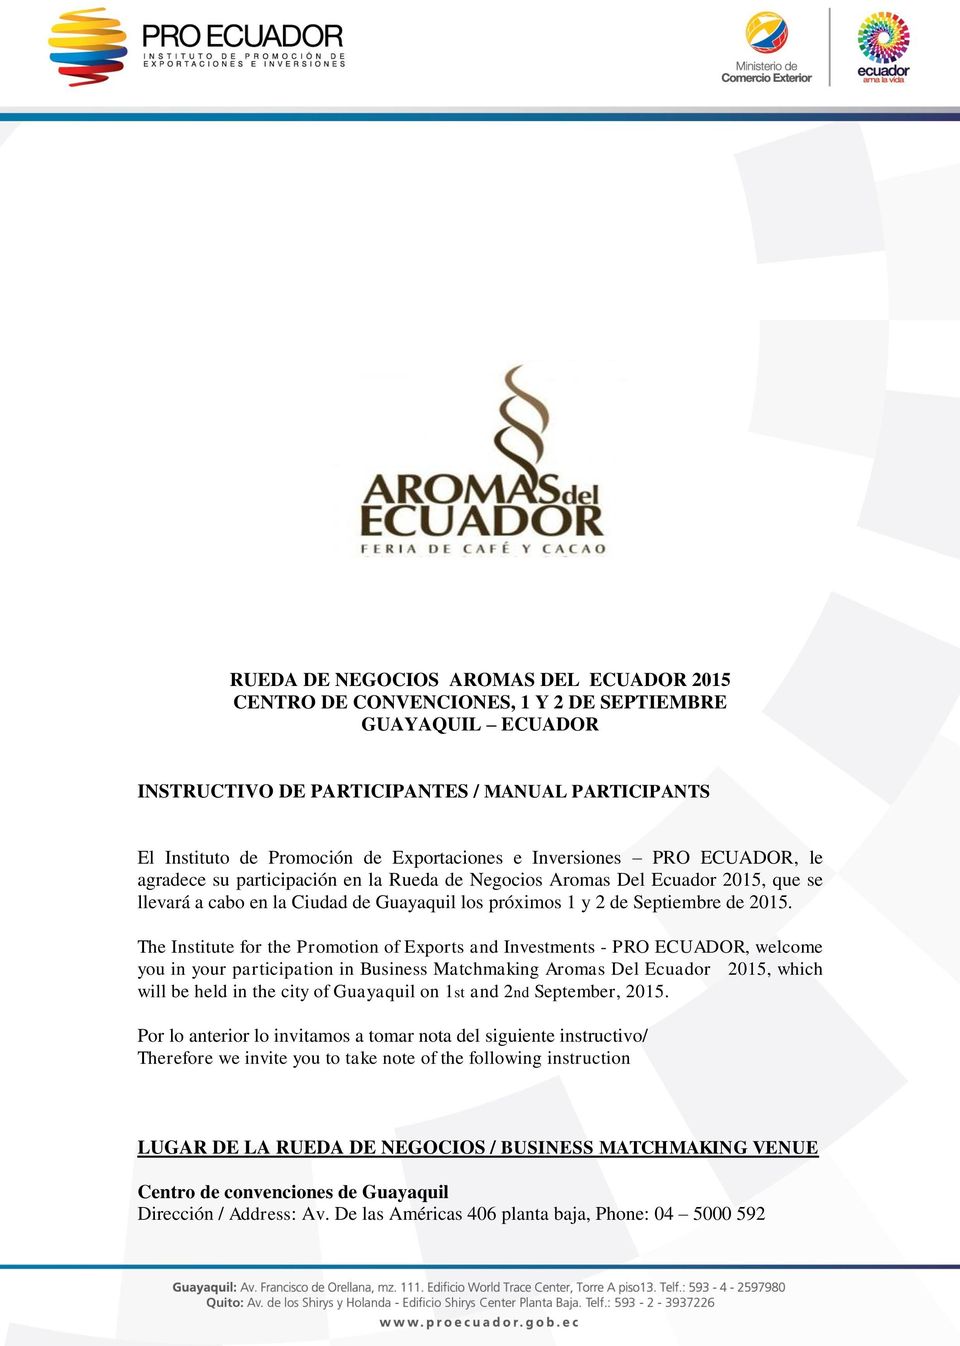 The Institute for the Promotion of Exports and Investments - PRO ECUADOR, welcome you in your participation in Business Matchmaking Aromas Del Ecuador 2015, which will be held in the city of